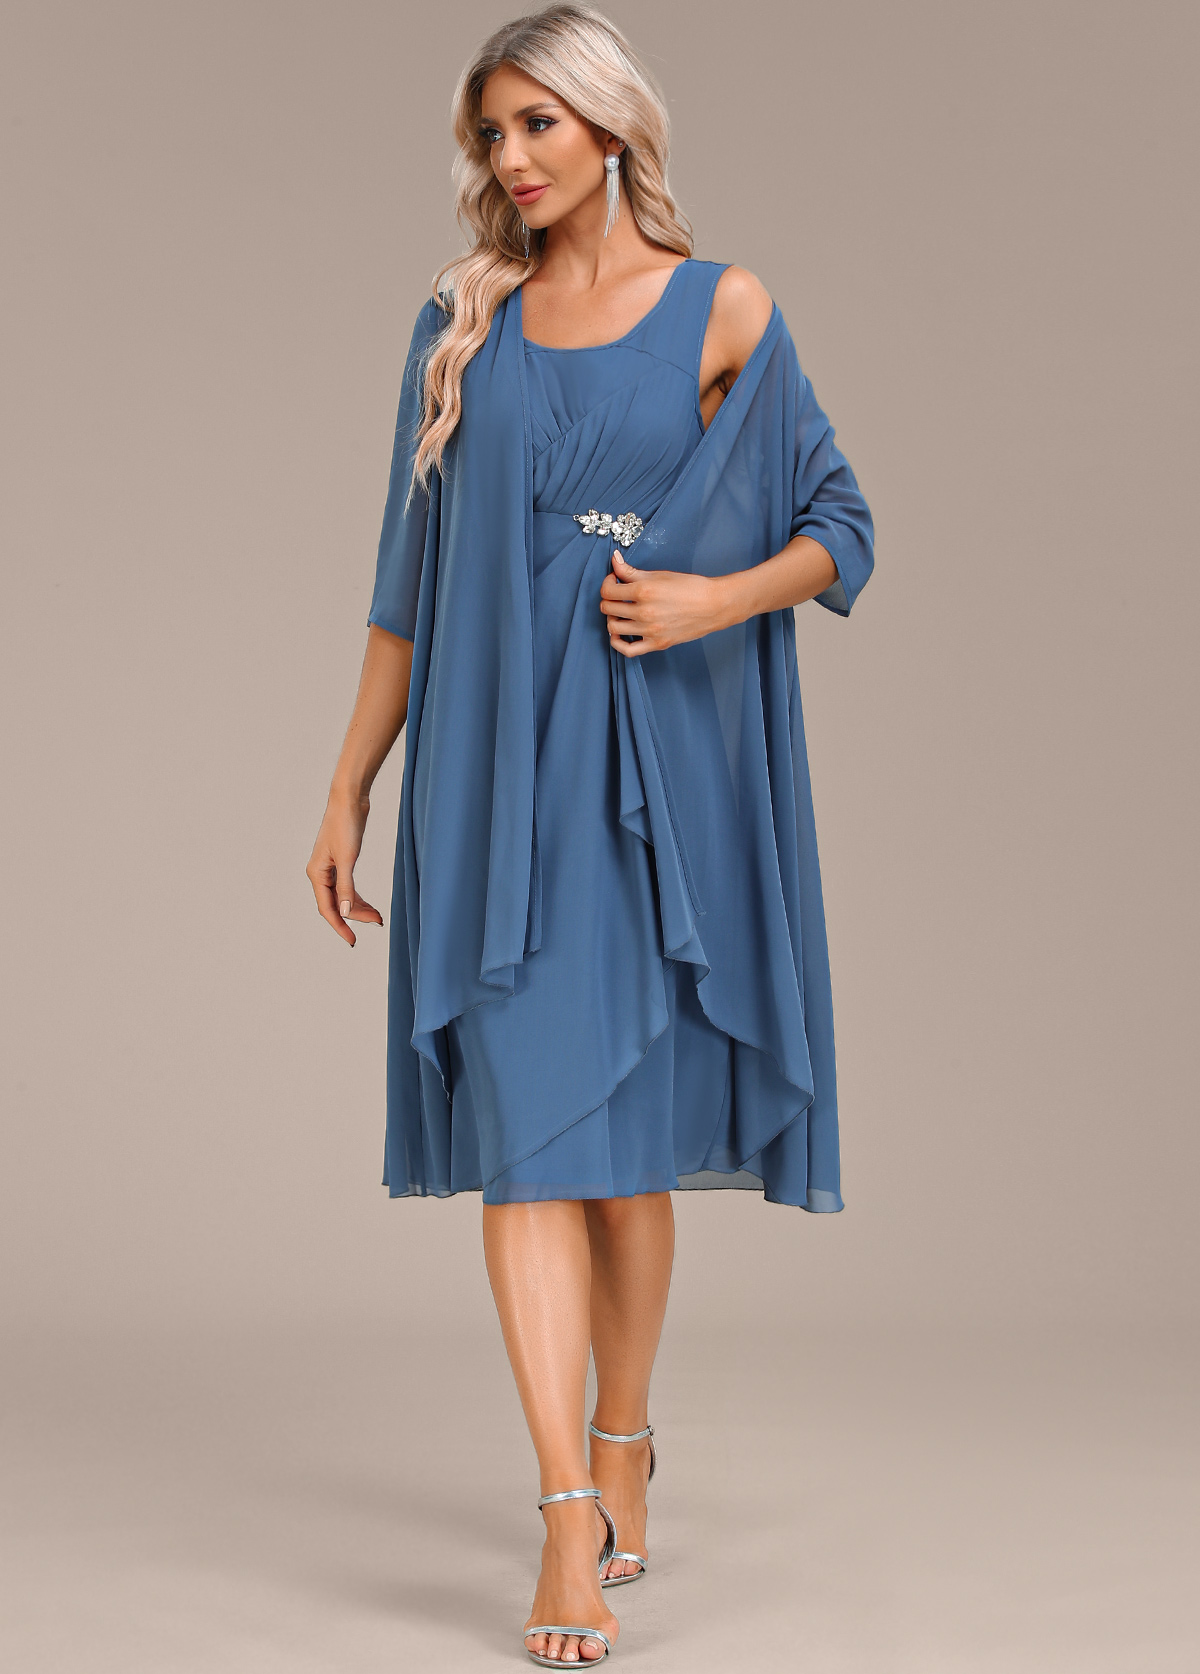 Hot Drilling Blue Round Neck Dress and Cardigan